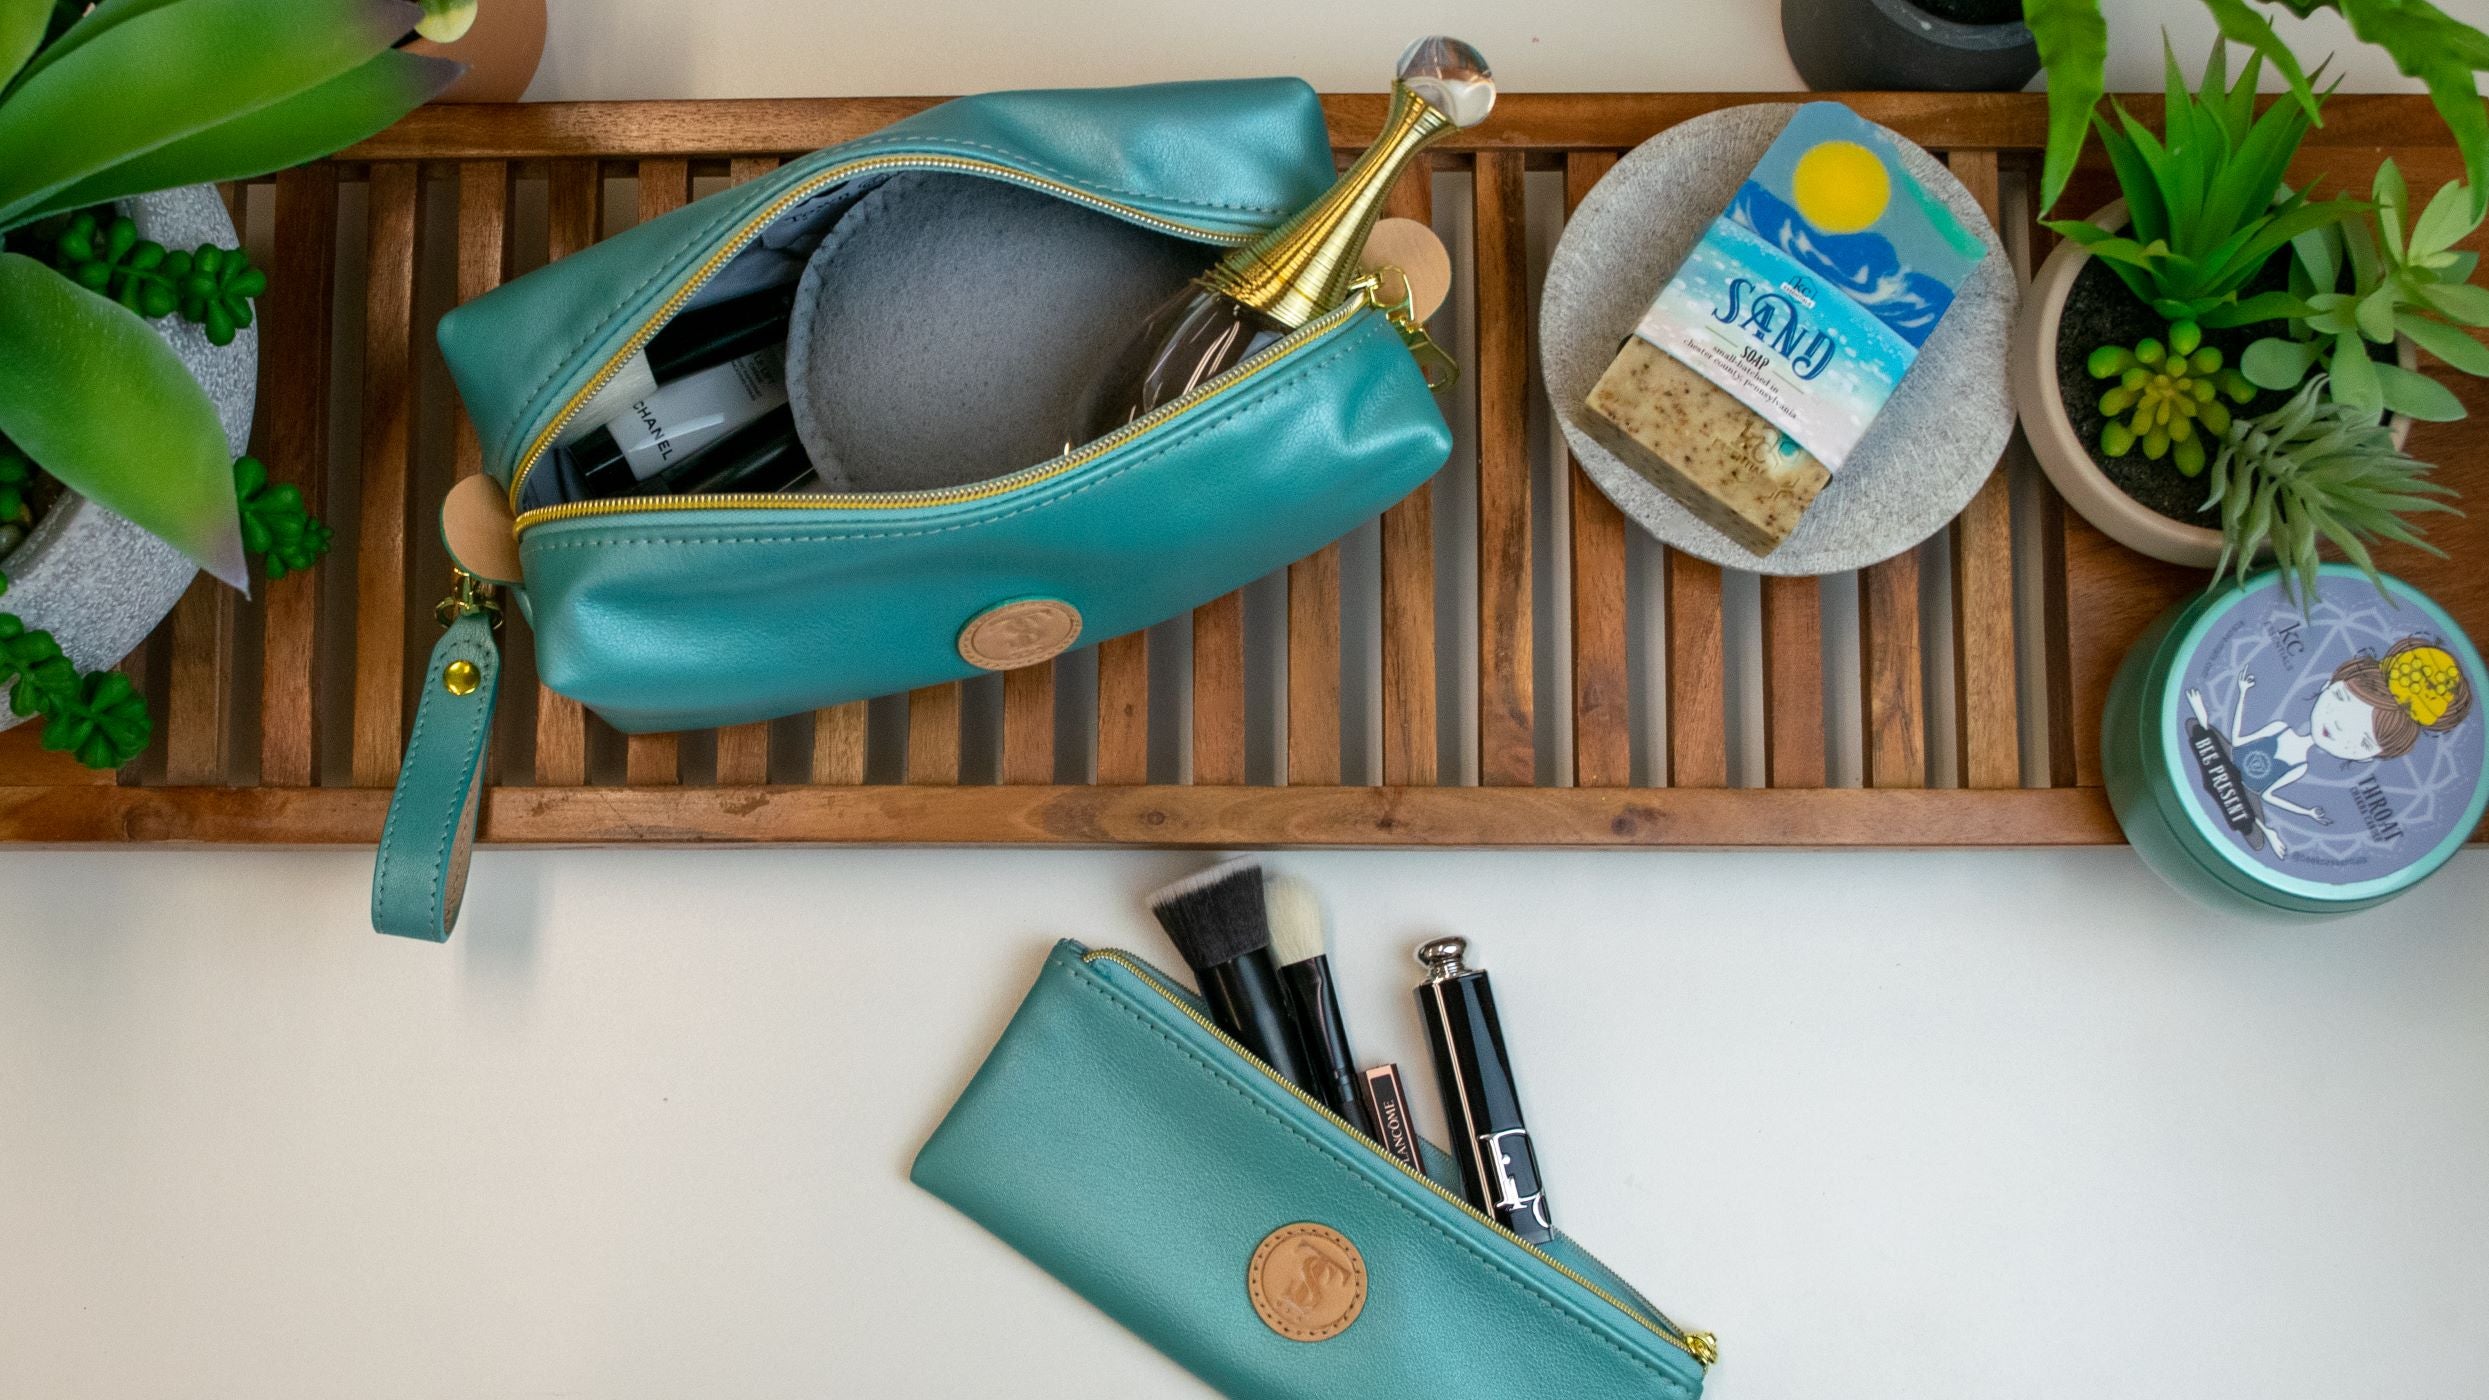 Town & Shore Handcrafted T5 Leather bath kit and brush bag shown in turquoise calfskin leather. Shown organizing cosmetics, toiletries, brushes. Shown on teak wood platform surrounded by tropical plants with Artisan made vegan bar soap and scented soy chakra candle in a metal tin.